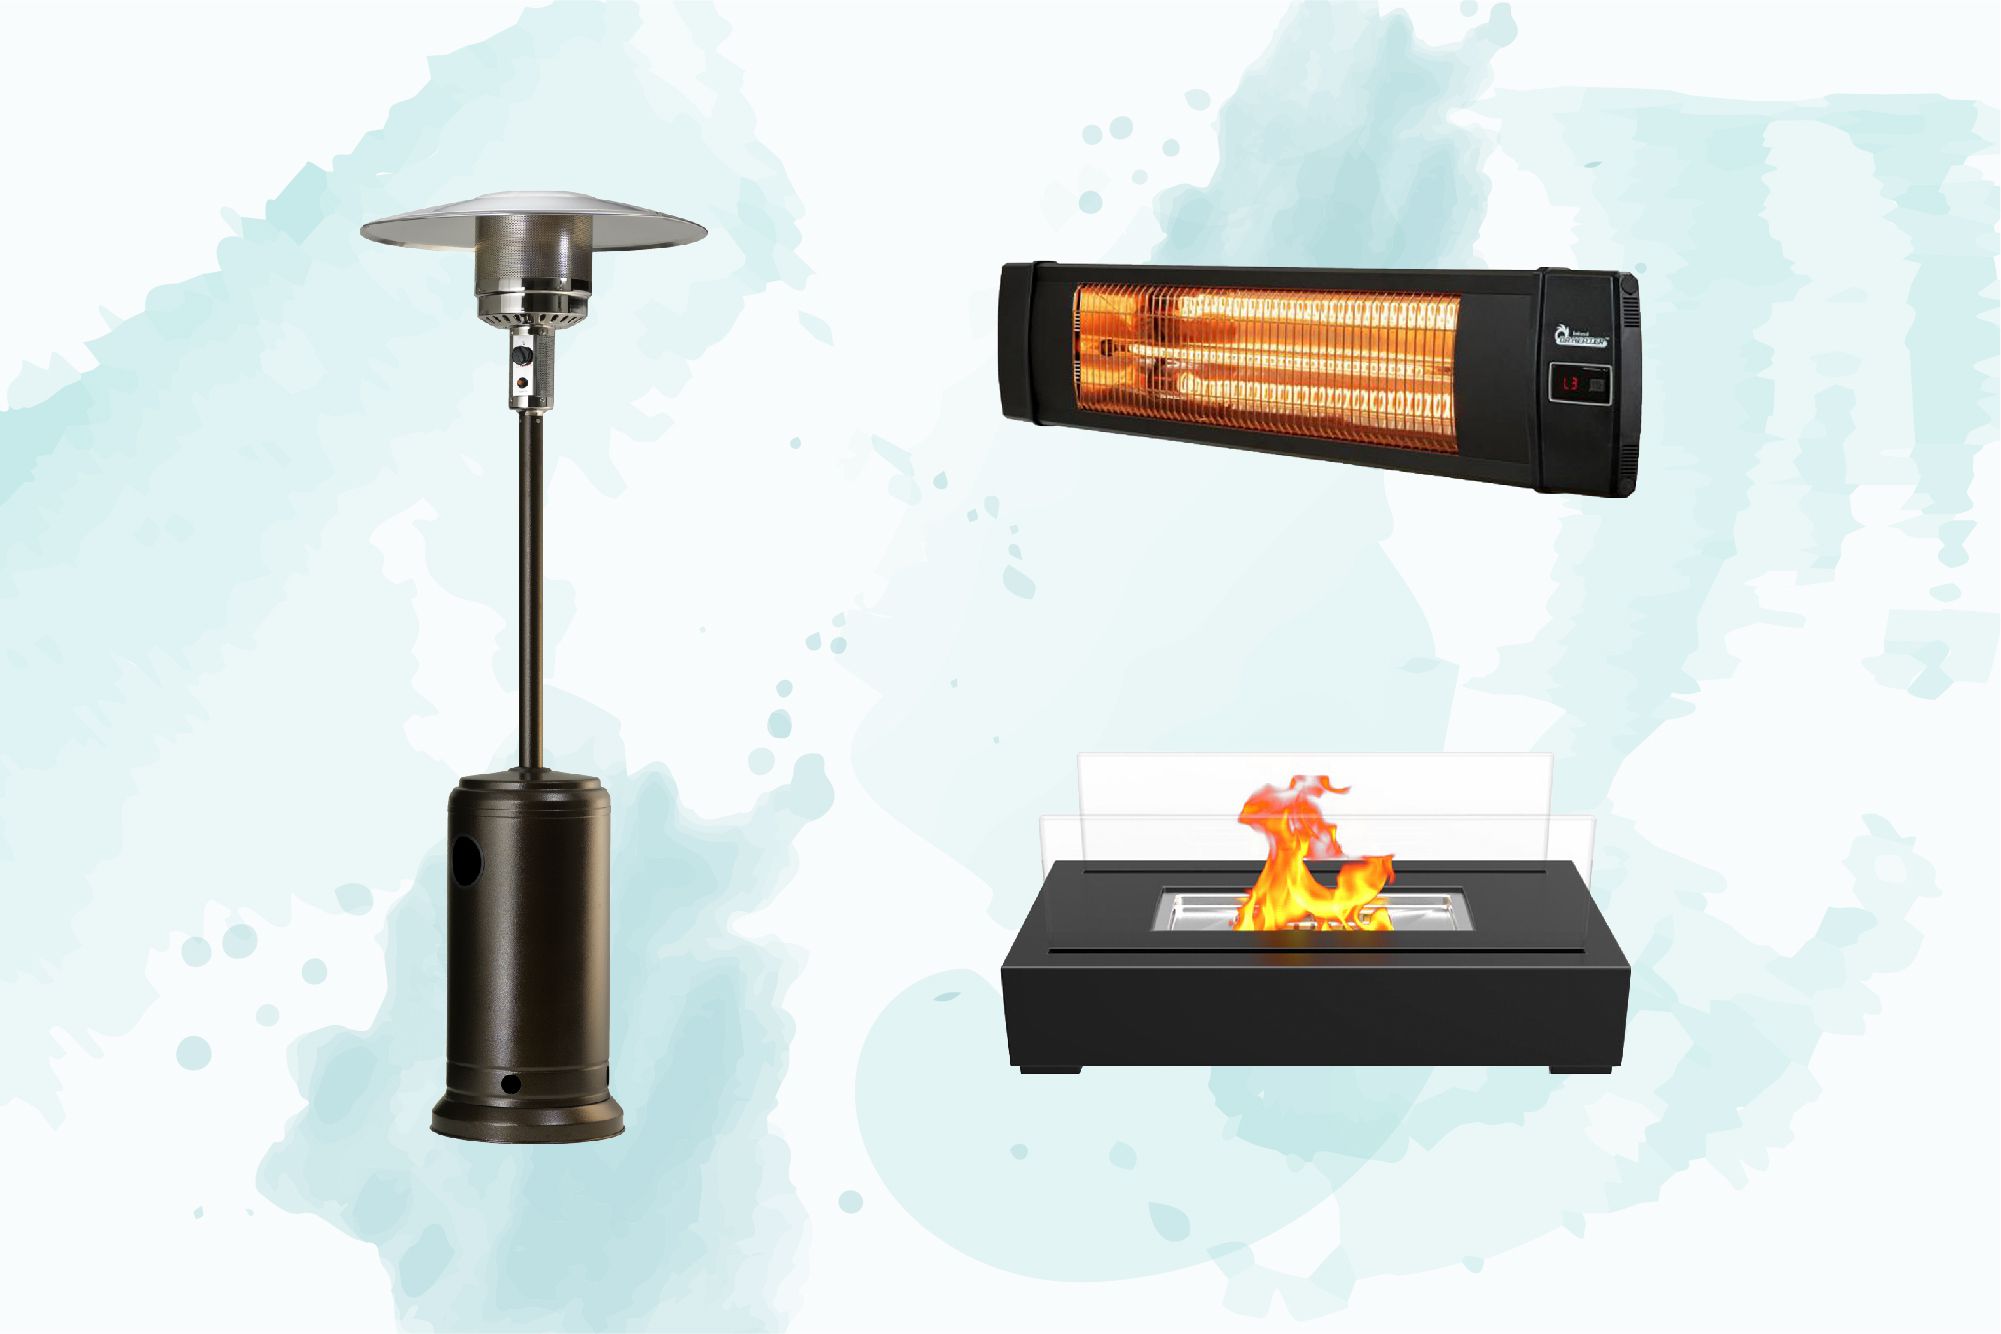 Get More Use Out of Your Patio With These Heaters